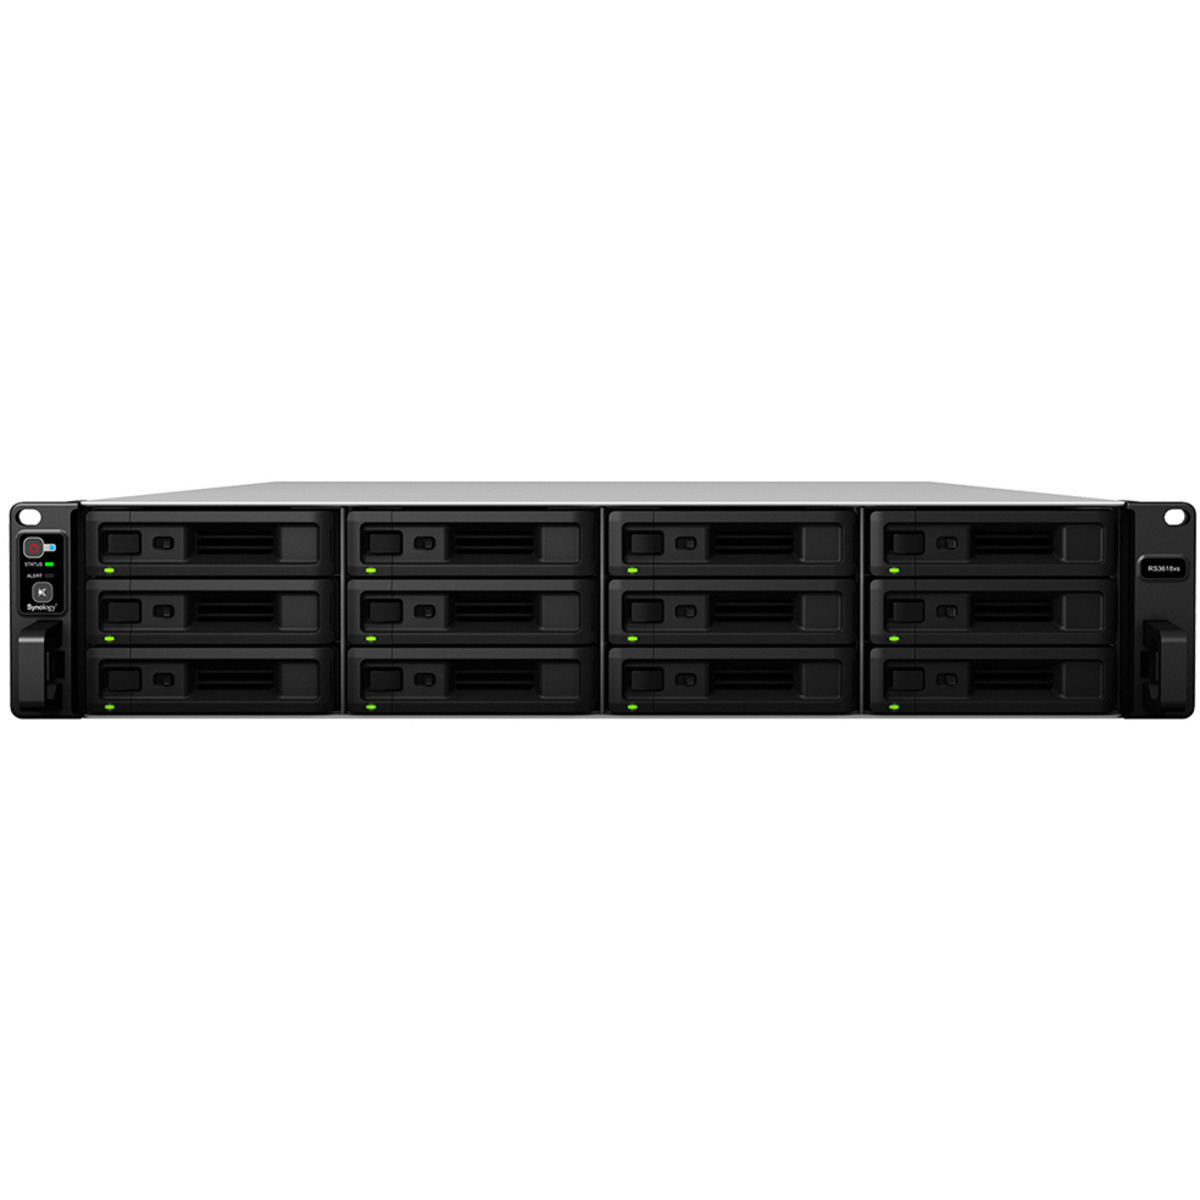 Synology RackStation RS3618xs 192tb 12-Bay RackMount Large Business / Enterprise NAS - Network Attached Storage Device 8x24tb Western Digital Red Pro WD240KFGX 3.5 7200rpm SATA 6Gb/s HDD NAS Class Drives Installed - Burn-In Tested RackStation RS3618xs